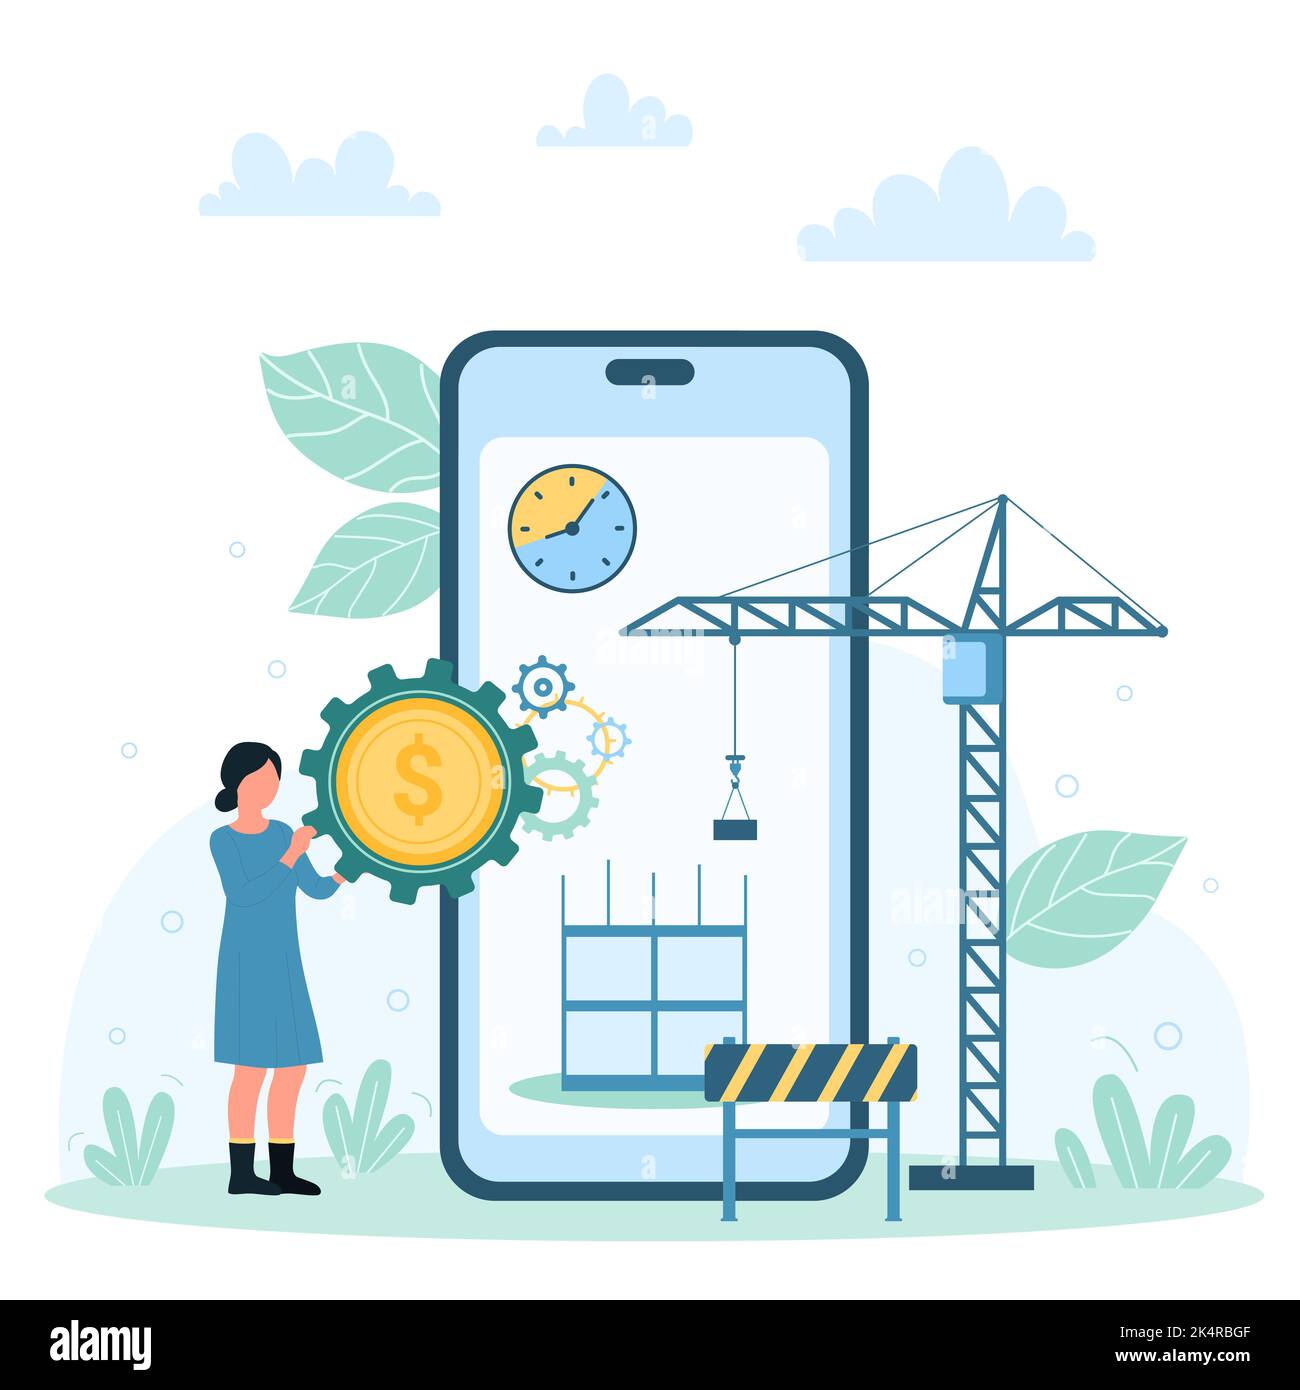 Investment in real estate and property, housing business vector illustration. Cartoon tiny woman holding gold coin inside gear, owner investing in building of new house, using construction crane Stock Vector